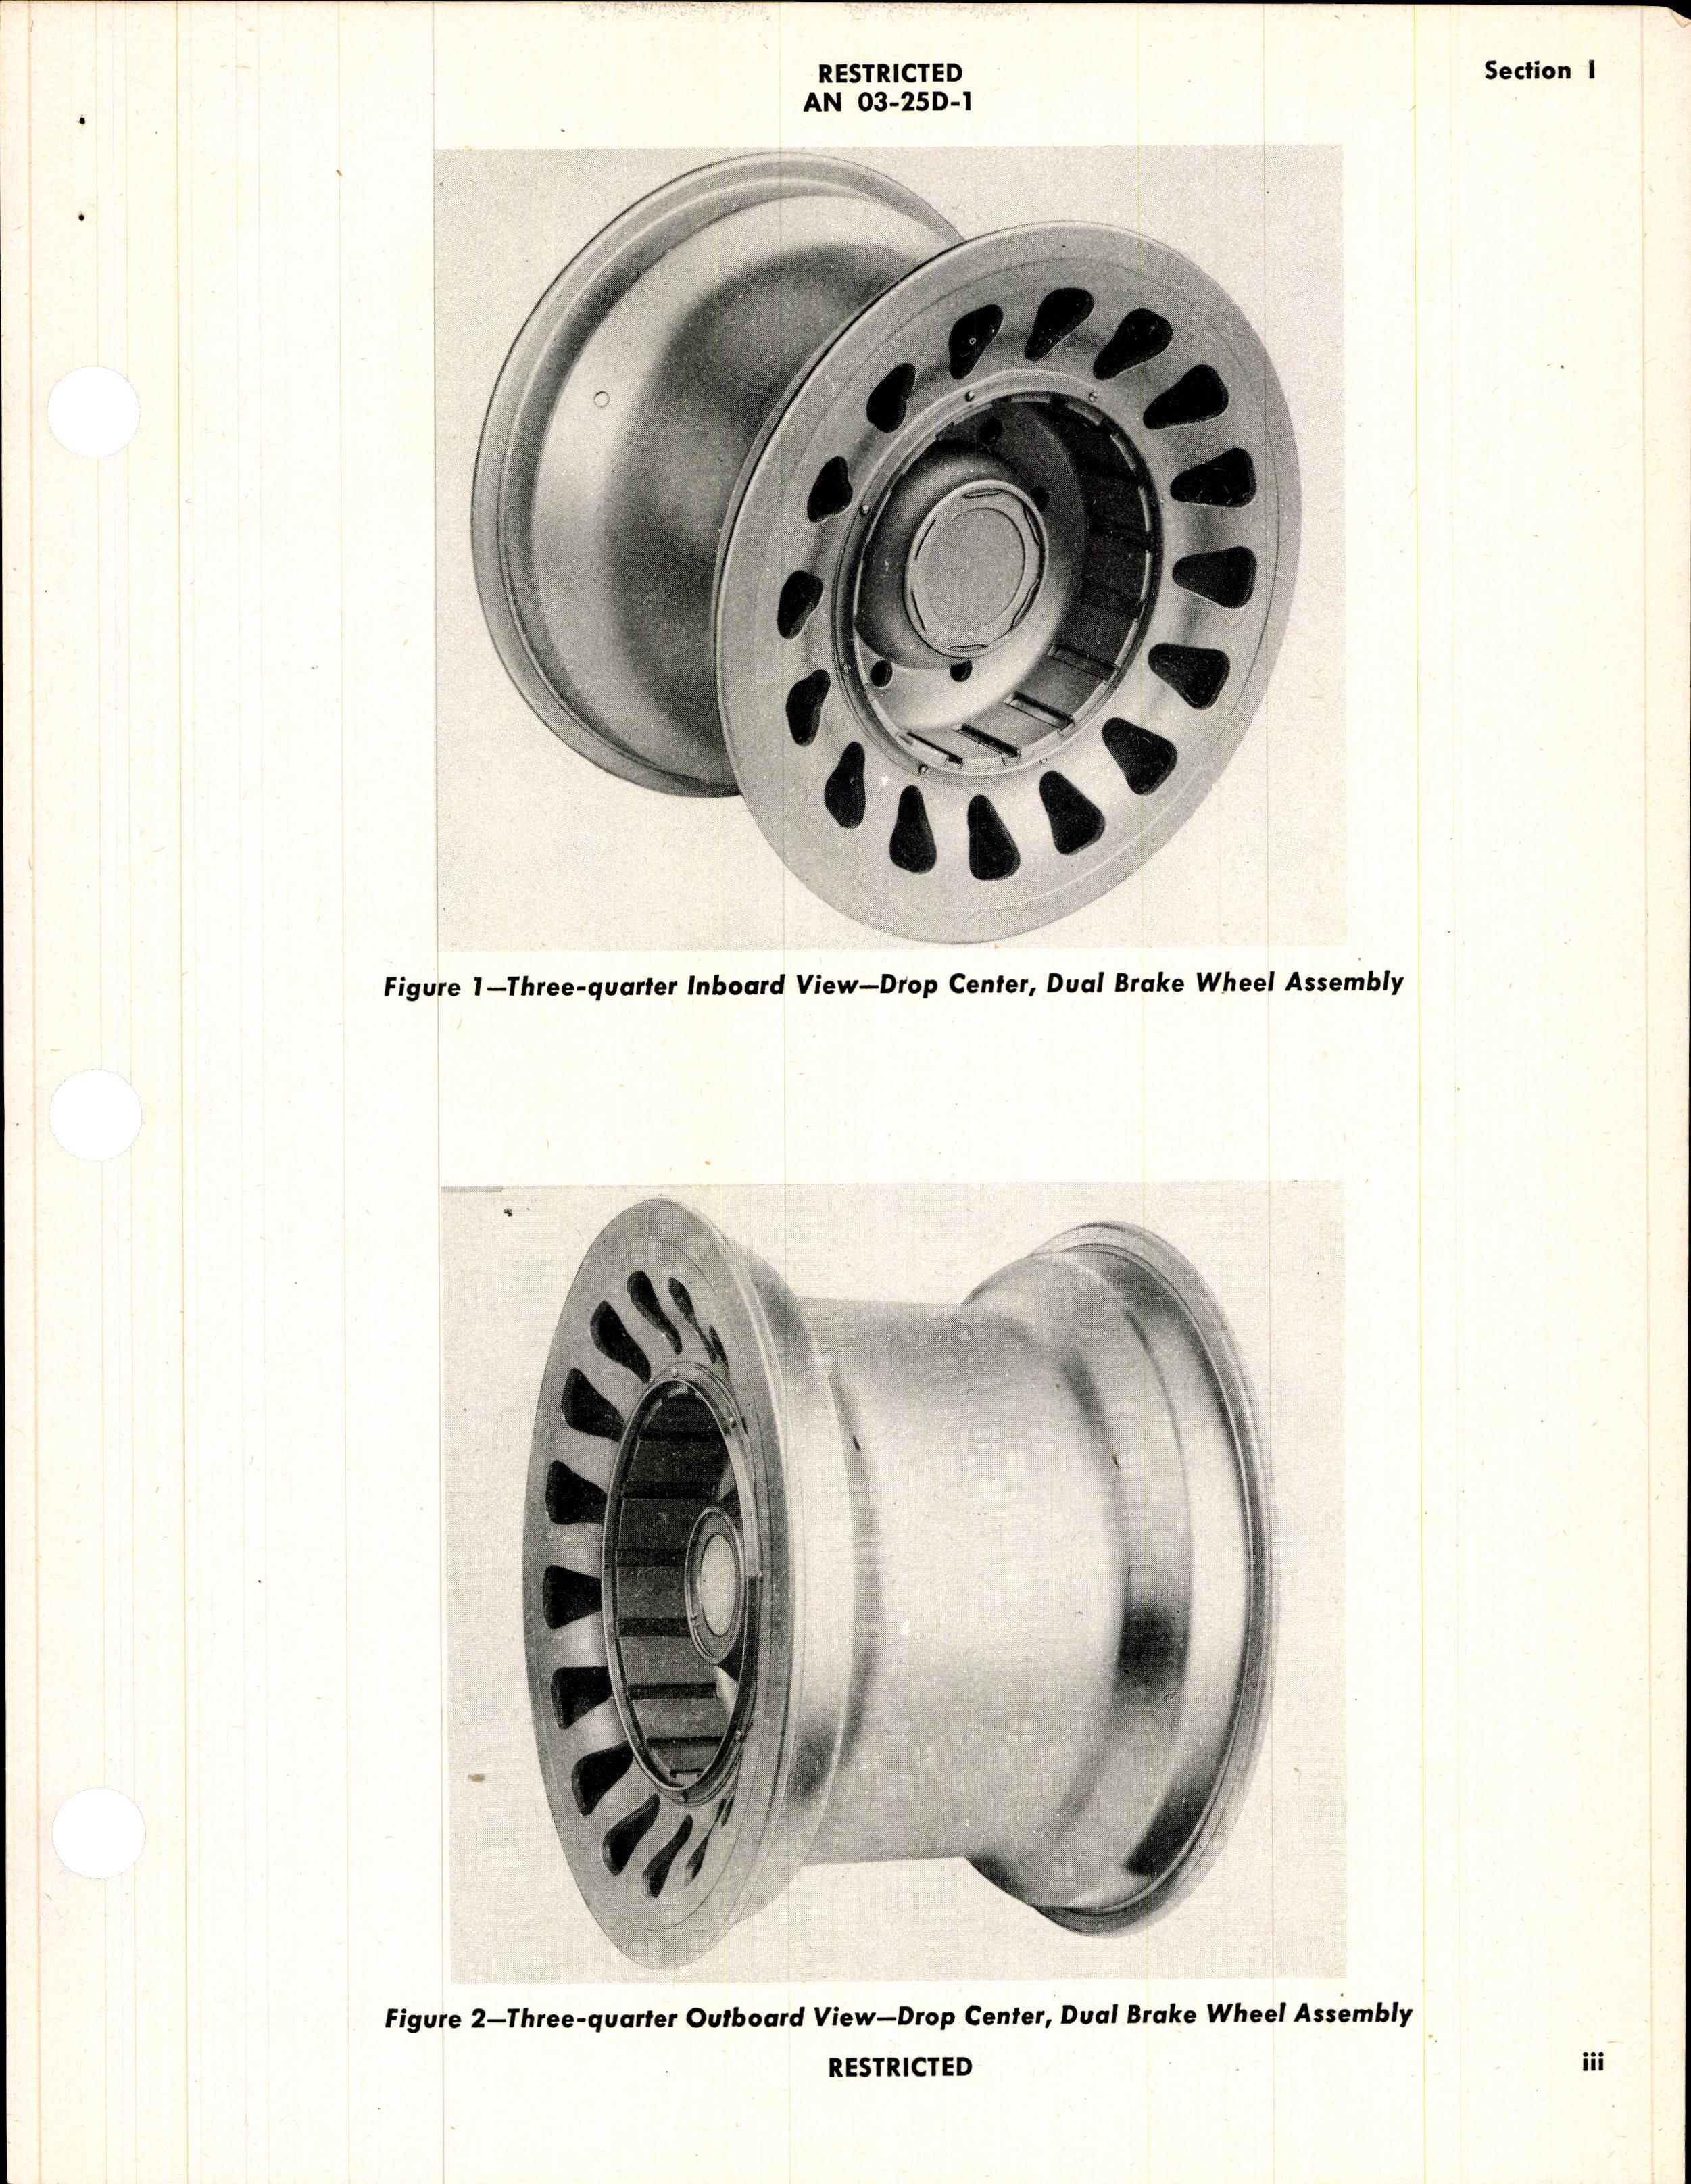 Sample page 5 from AirCorps Library document: Operation, Service, & Overhaul Instructions with Parts Catalog for Landing Wheels For Use With Multiple Disc Brakes